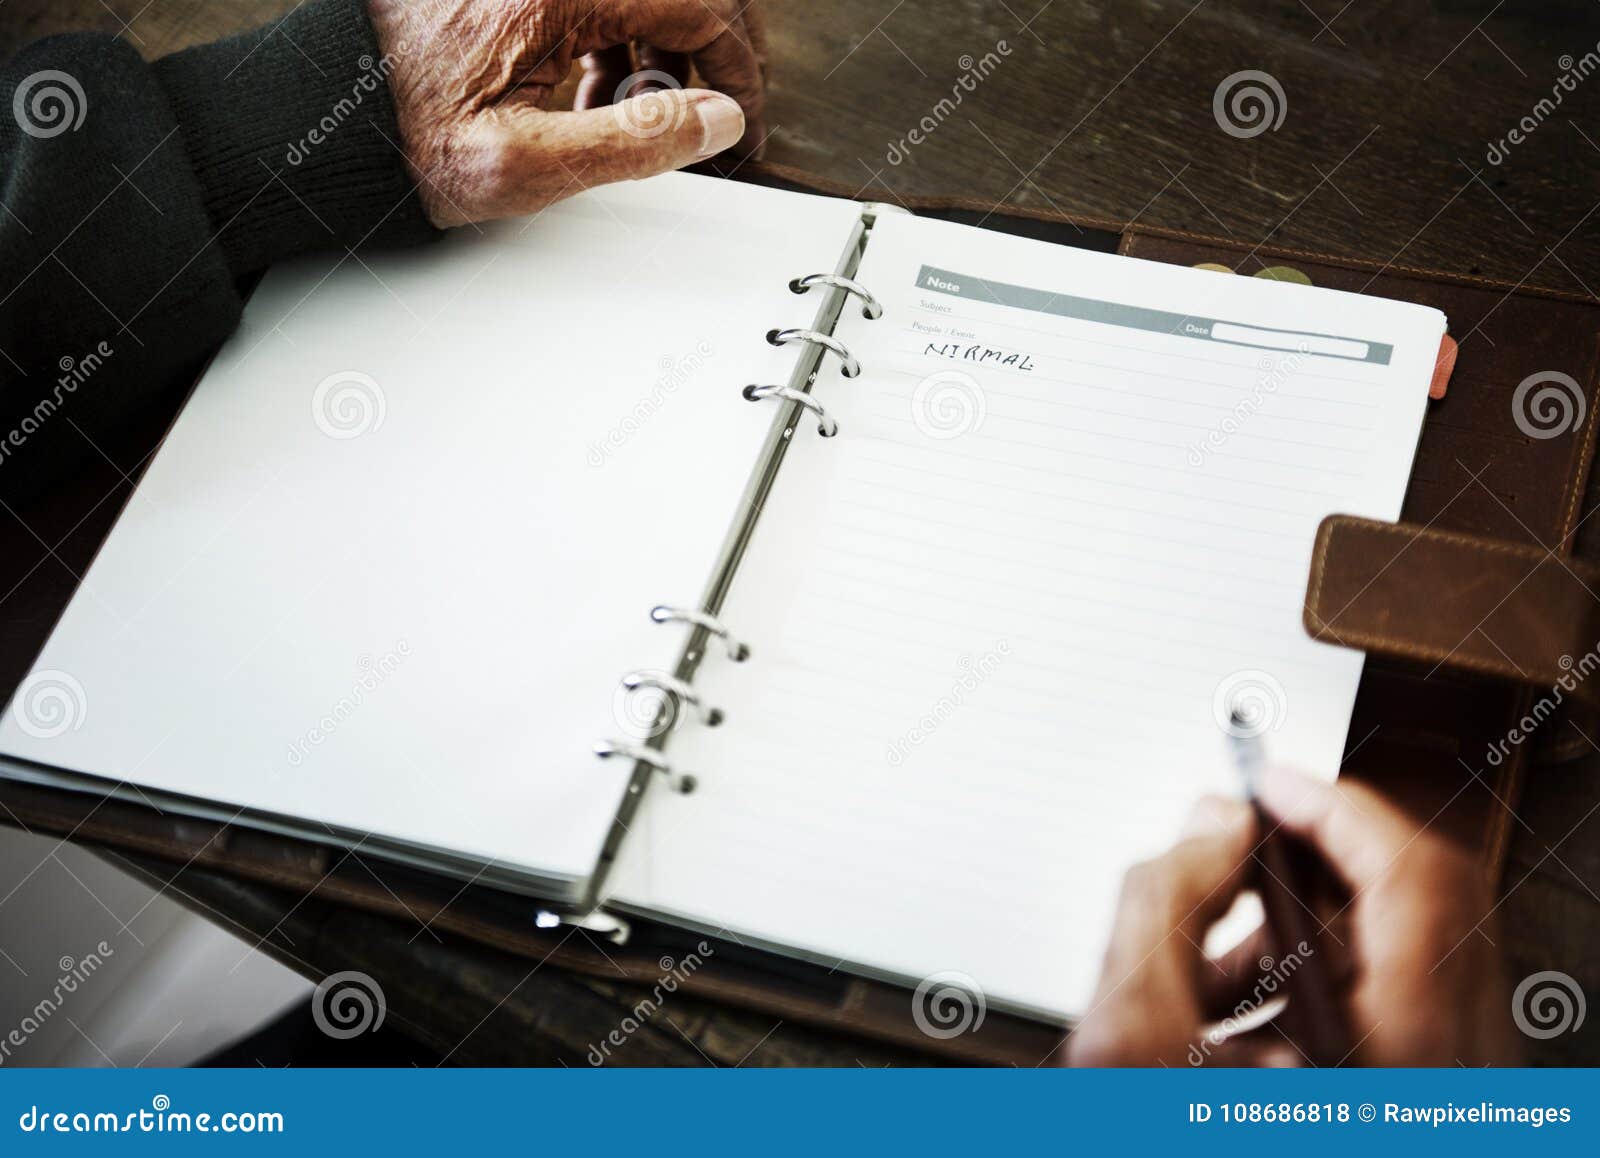 senior person`s hand writing a journal